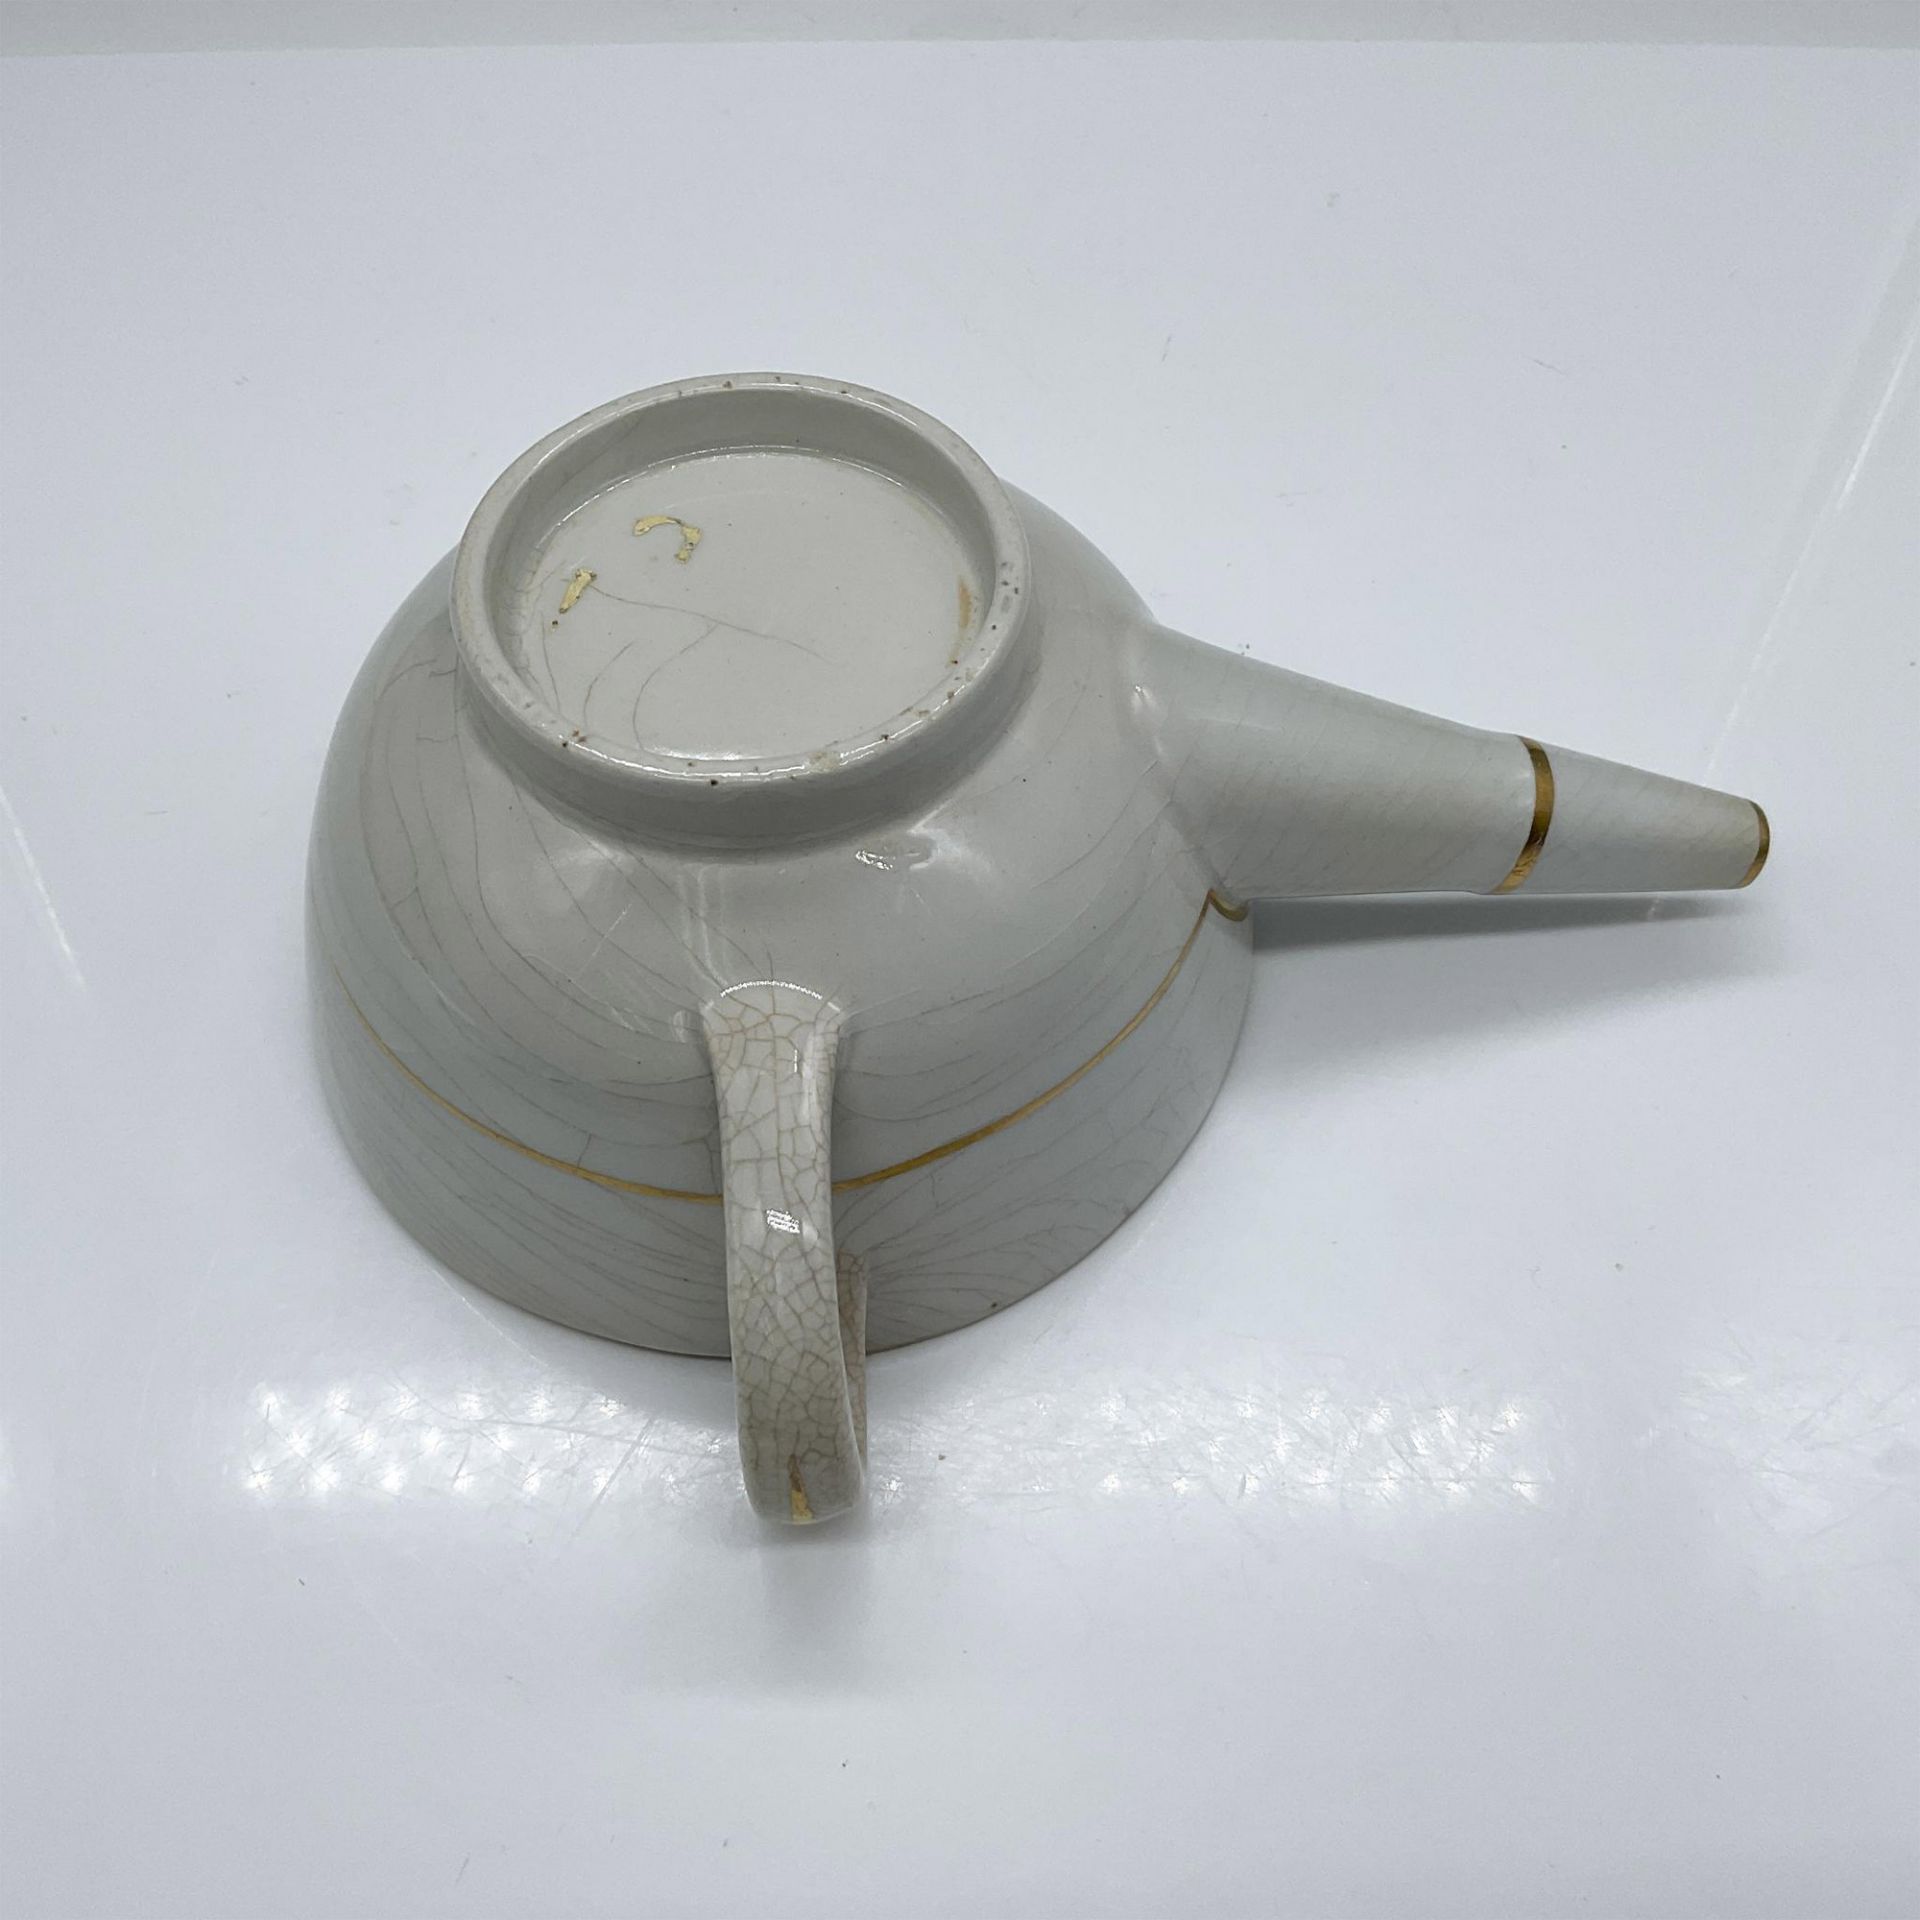 English Style Invalid Feeding Cup - Image 3 of 3